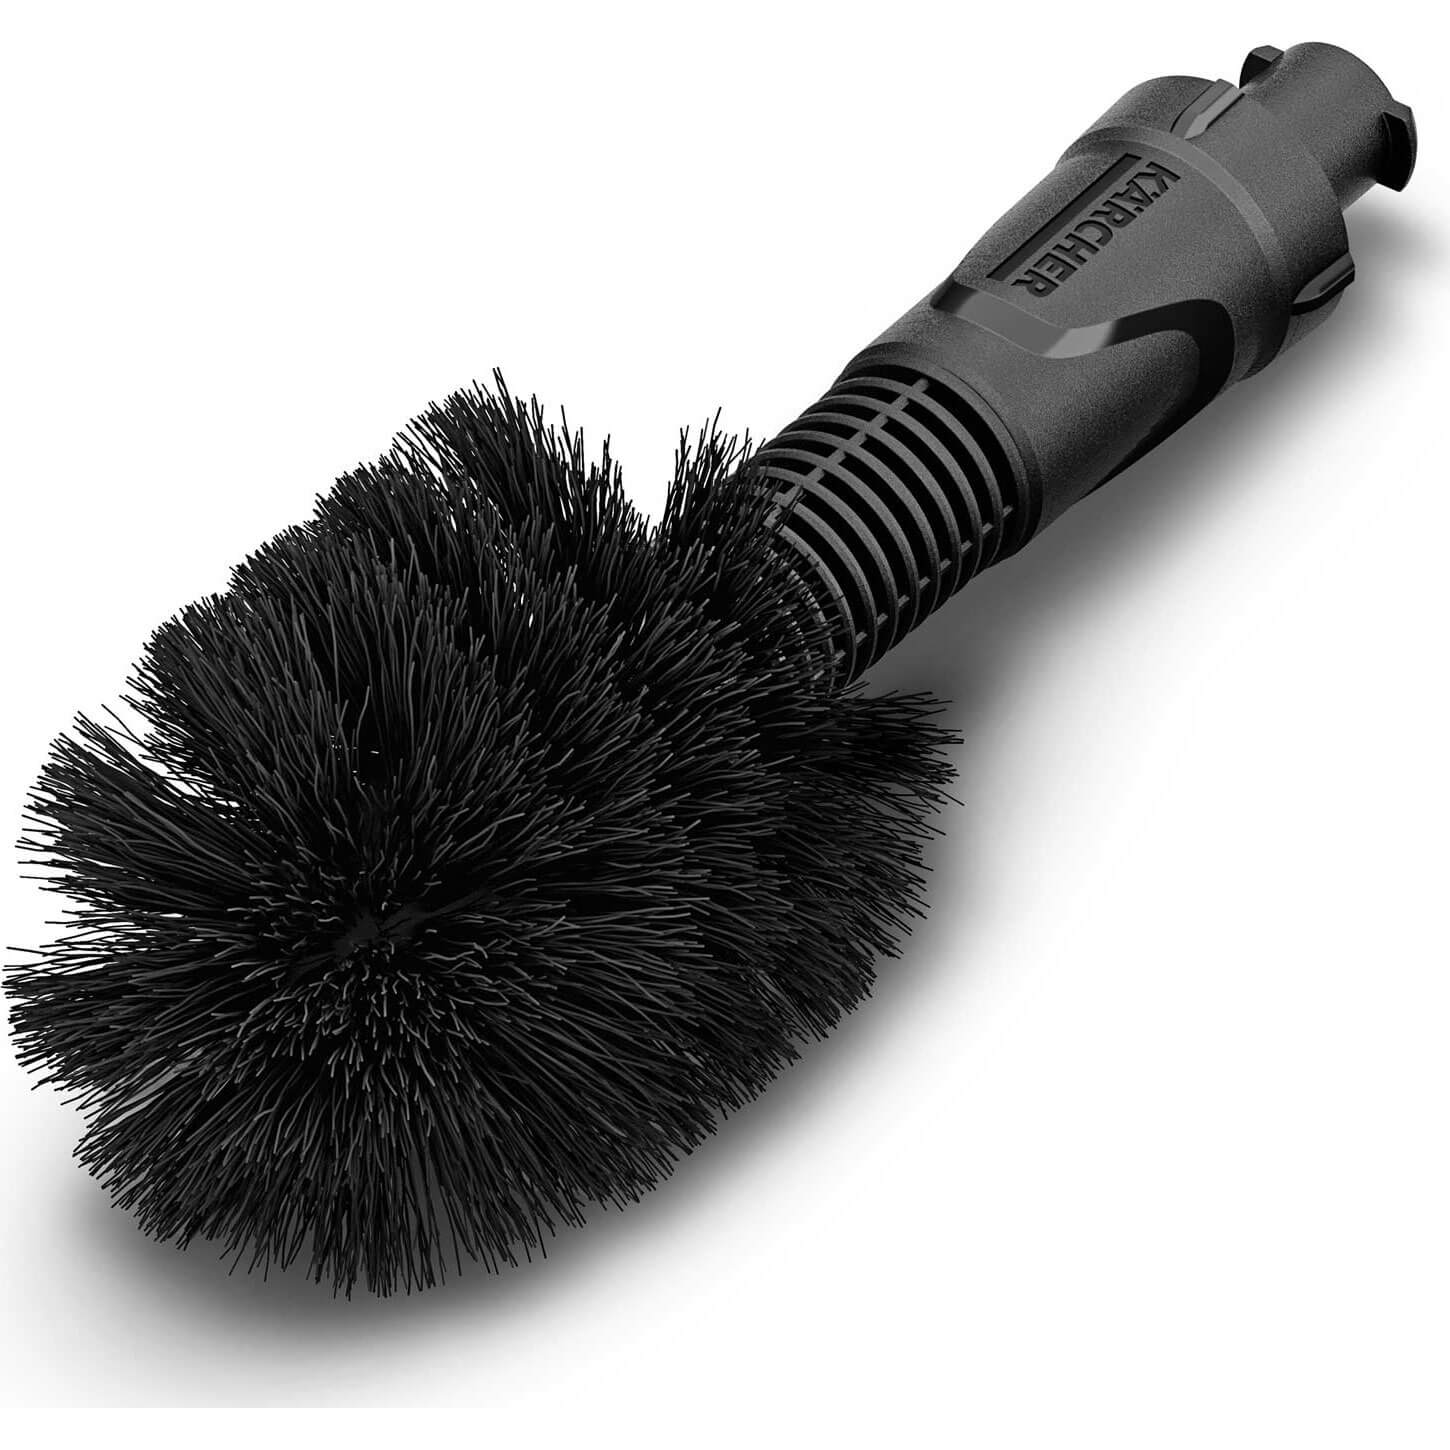 Image of Karcher Universal Brush for OC 3 Portable Cleaners